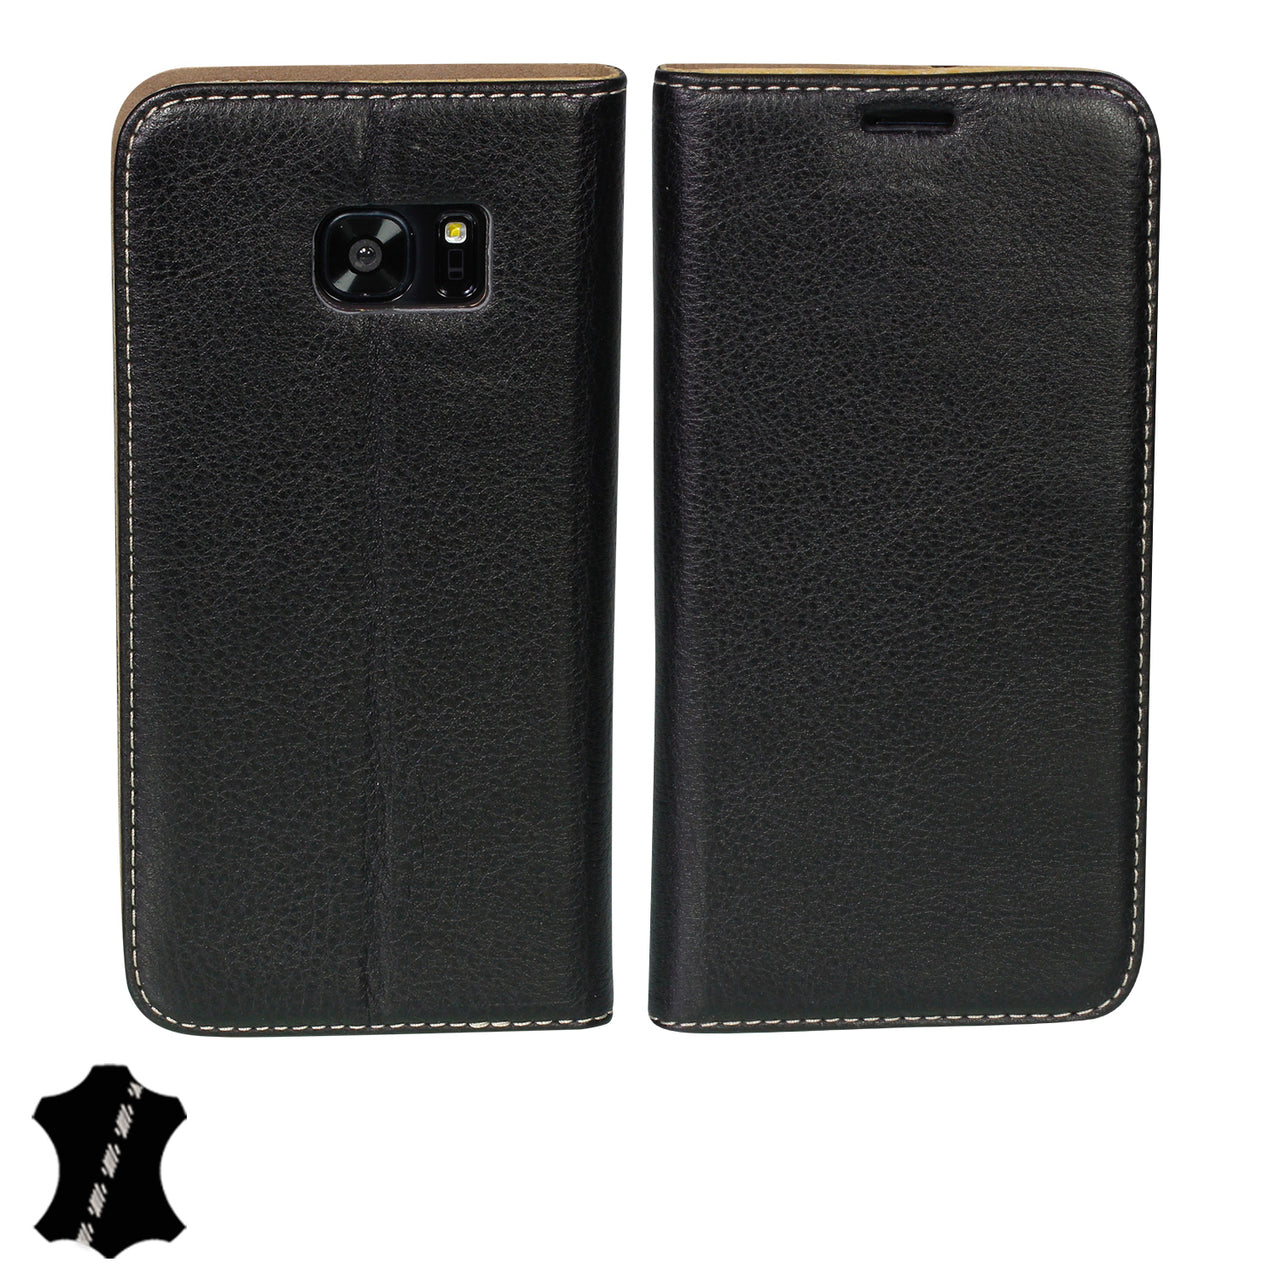 Samsung Galaxy S7 Edge Genuine Leather Case with Stand | Artisancover